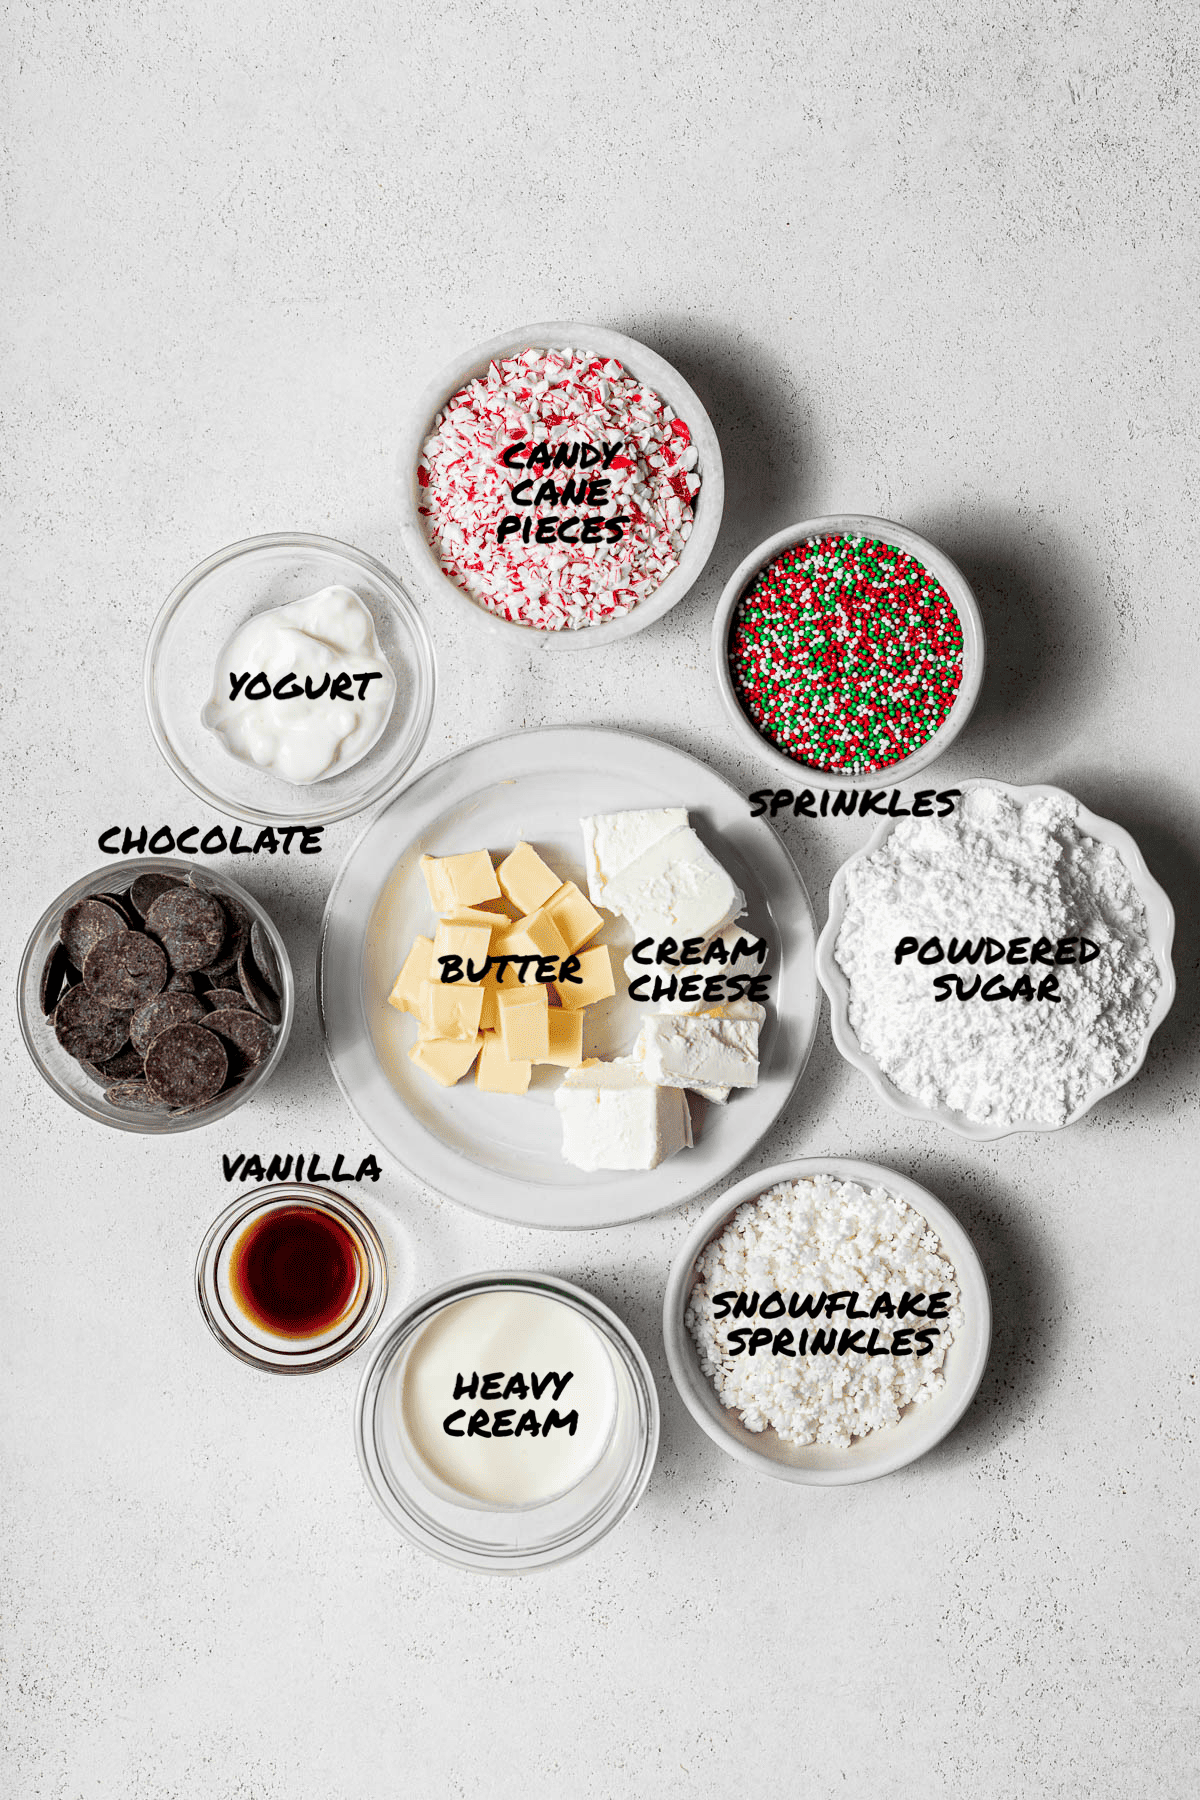 ingredients for donut glazes and toppings.